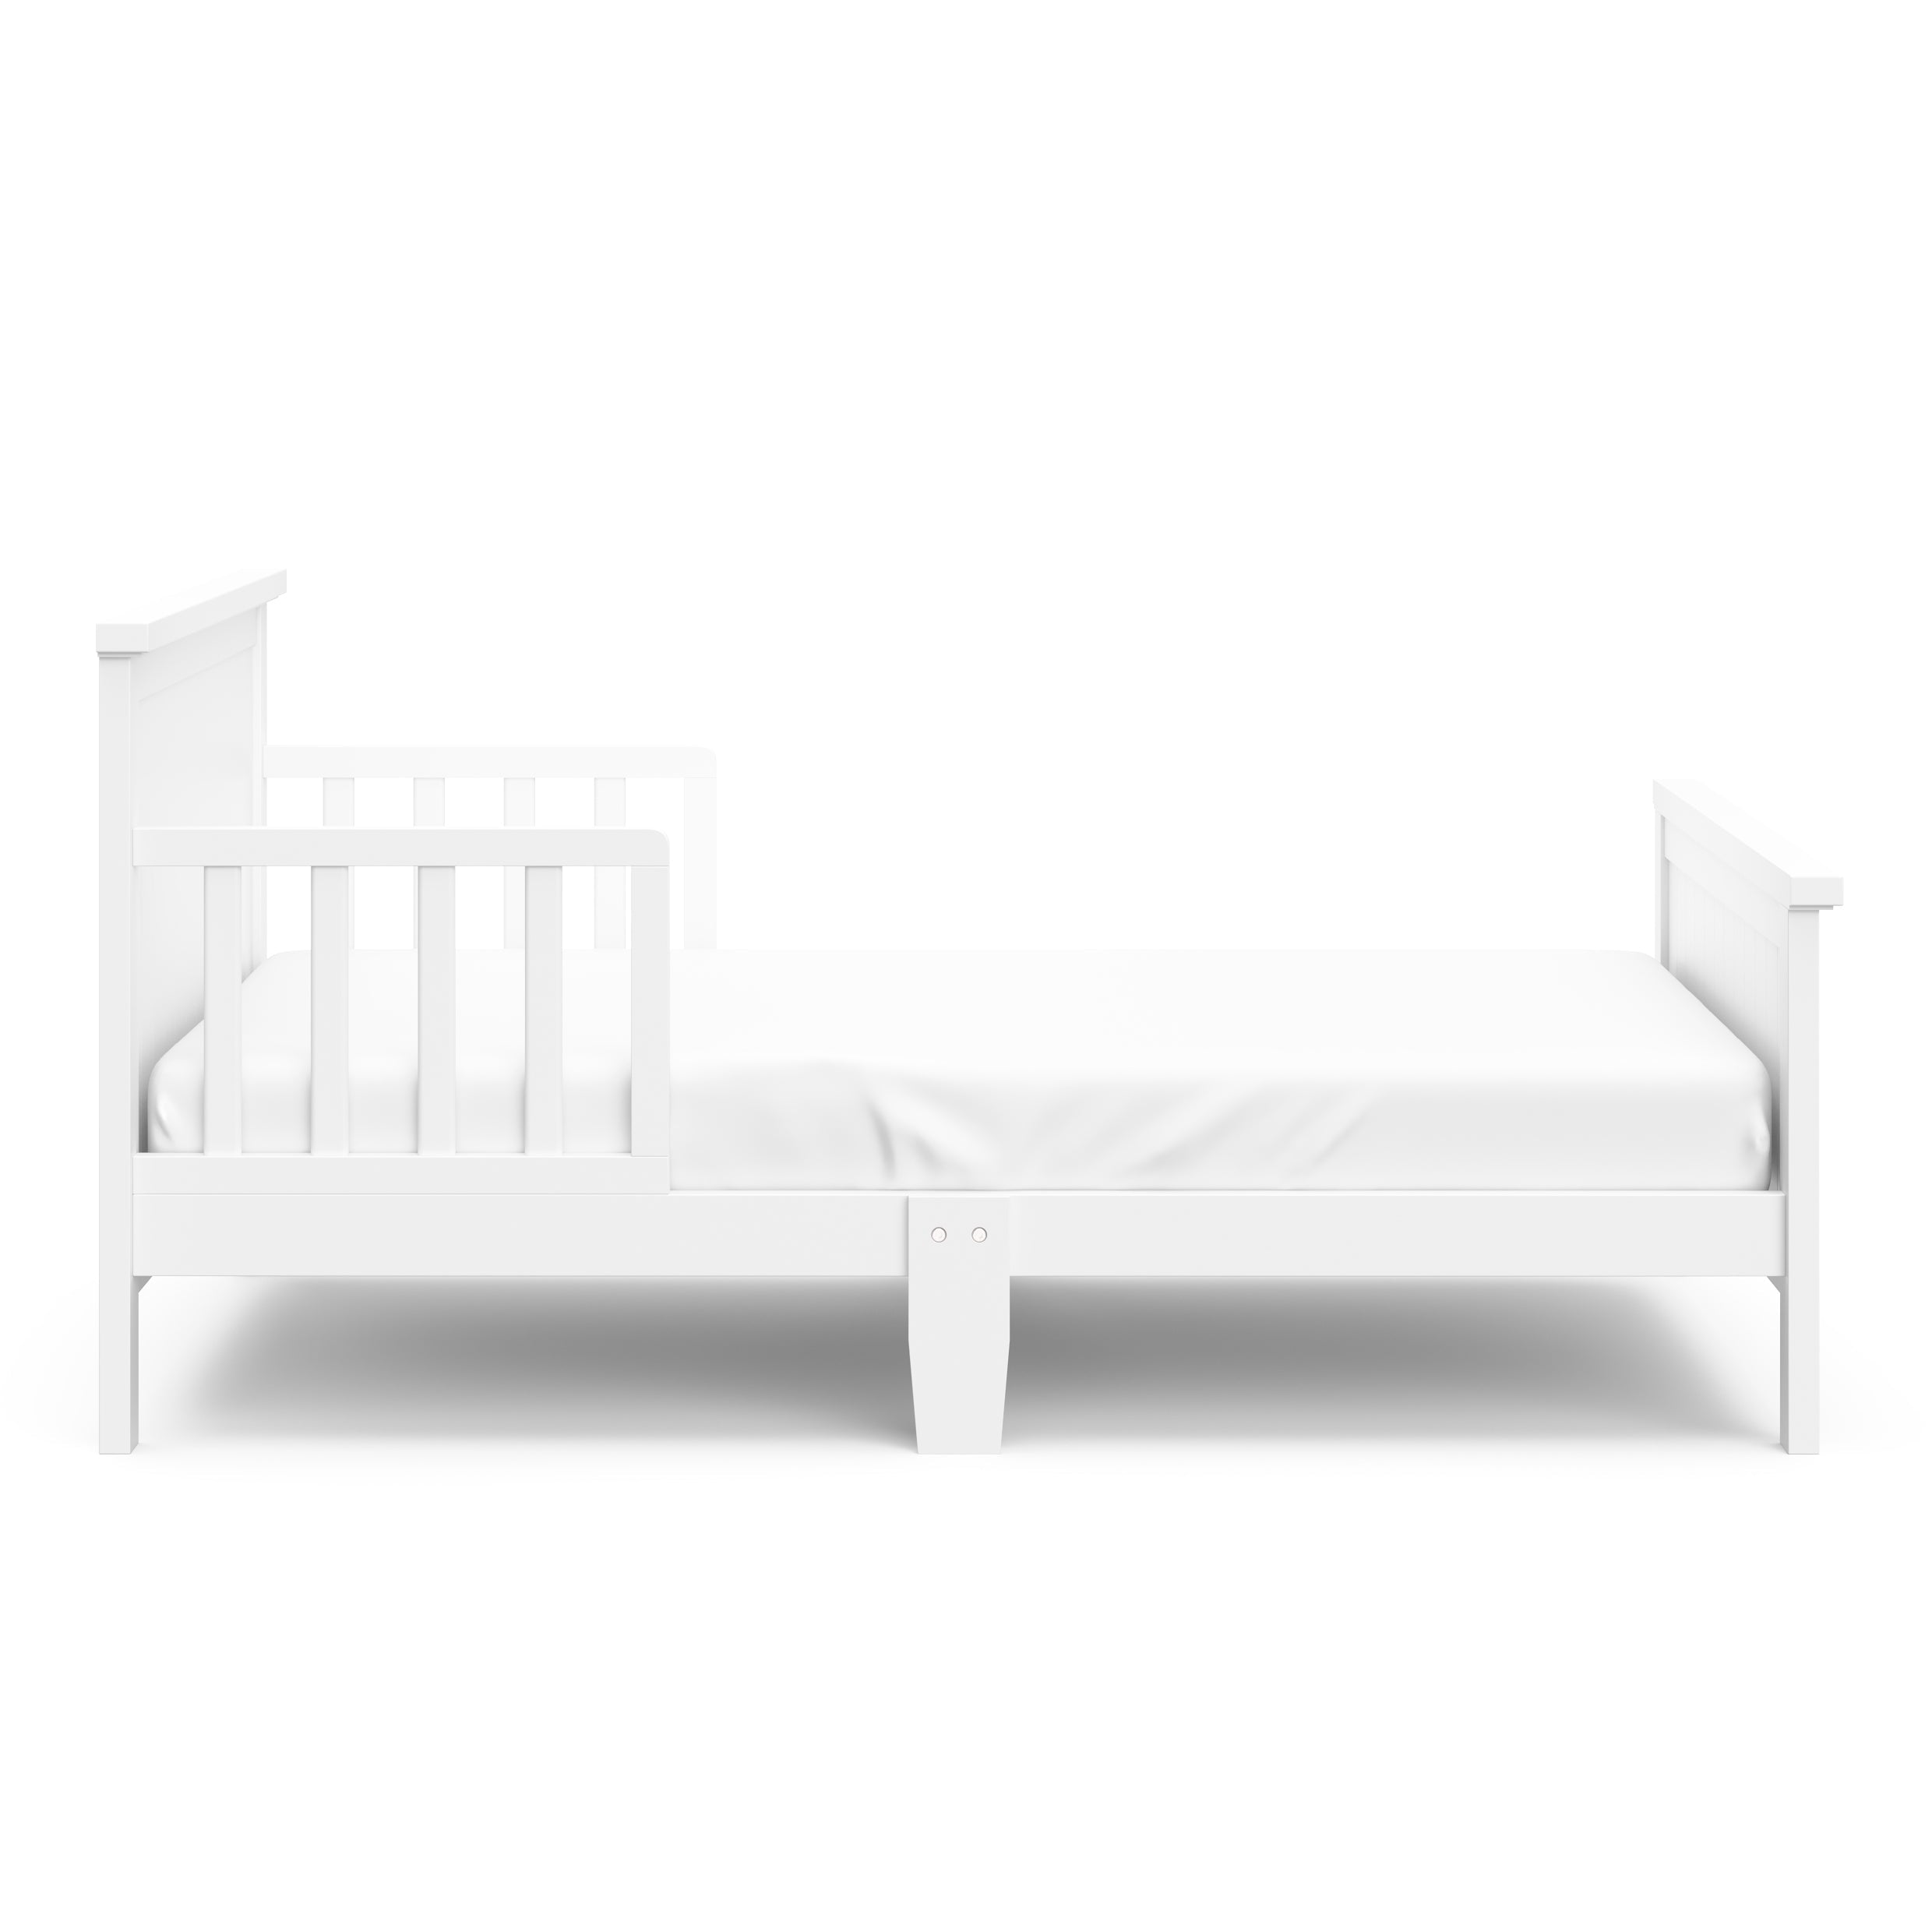 Graco Bailey Wood Single Toddler Kids Bed, Guardrails Included White